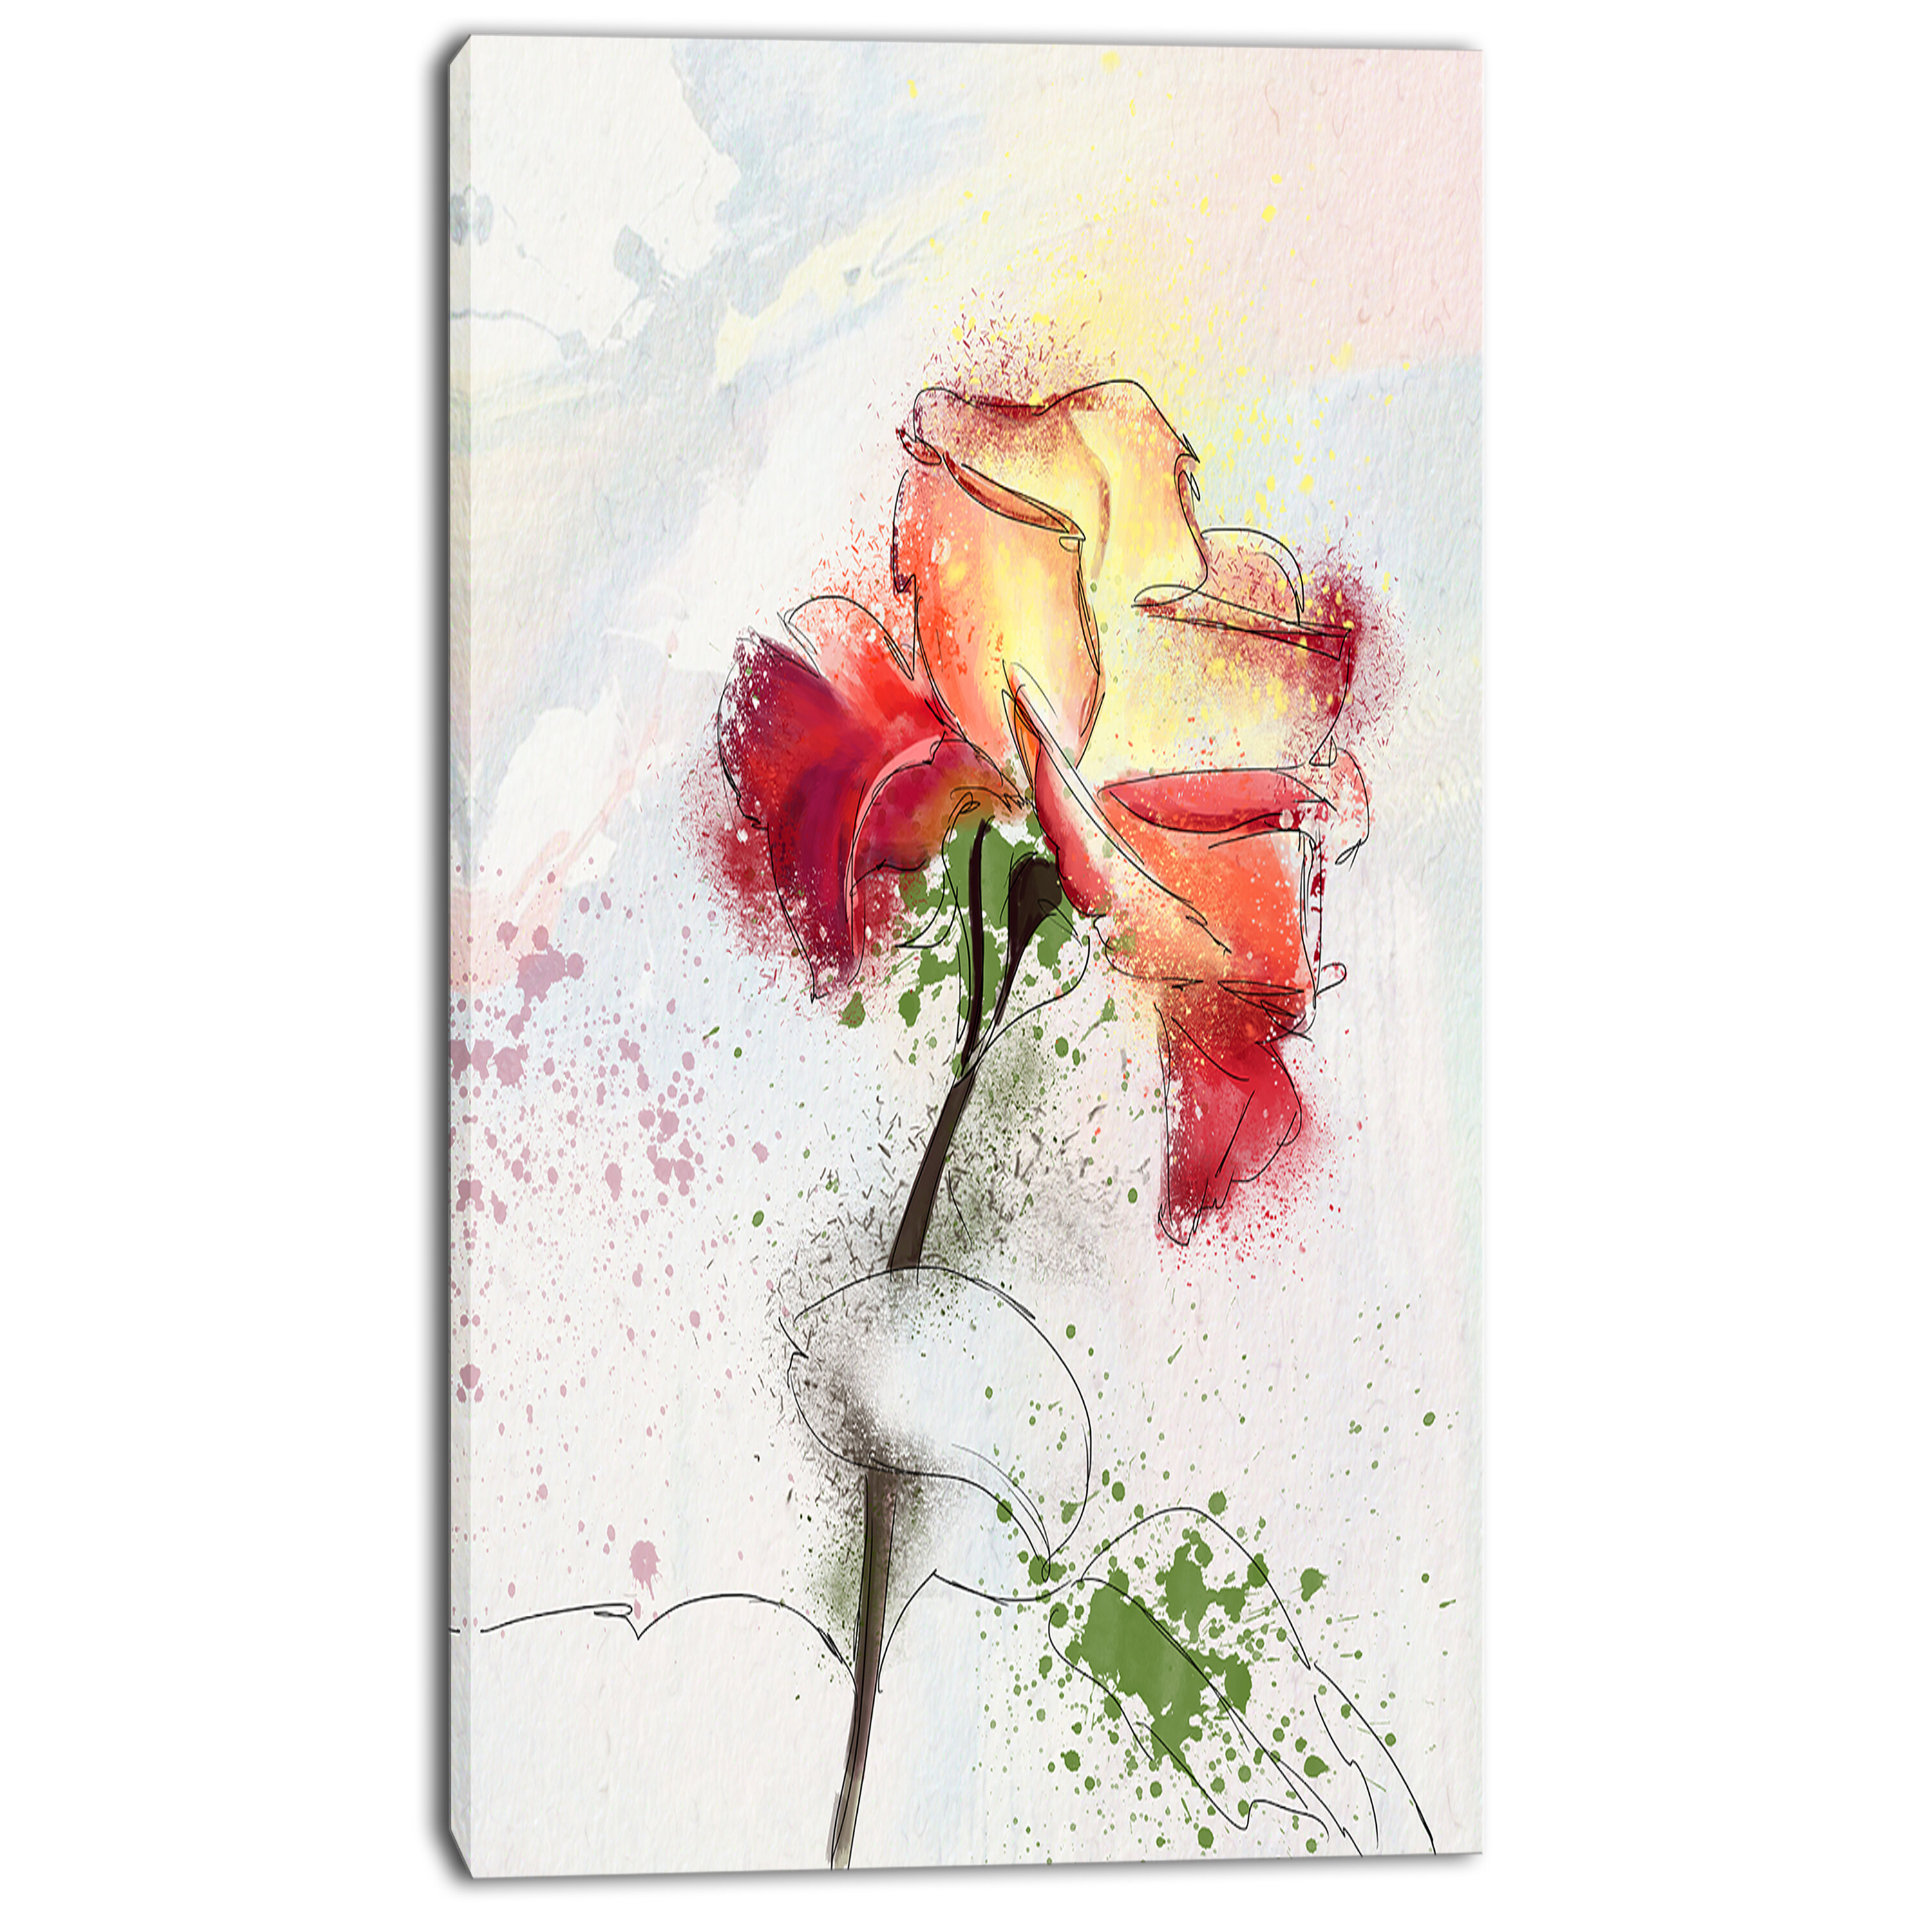 Beautiful rose - My colorful artwork - Drawings & Illustration, Flowers,  Plants, & Trees, Flowers, Flowers I-Z, Roses - ArtPal